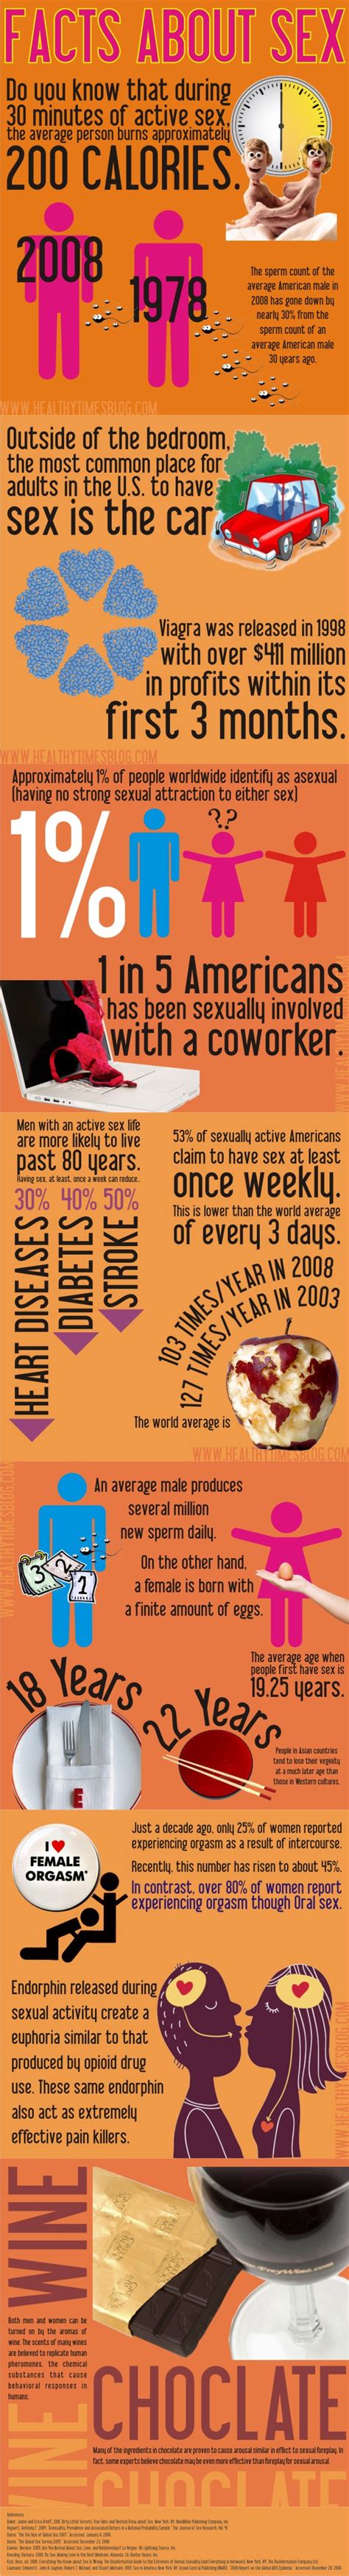 Facts About Sex Infographic Infographic List